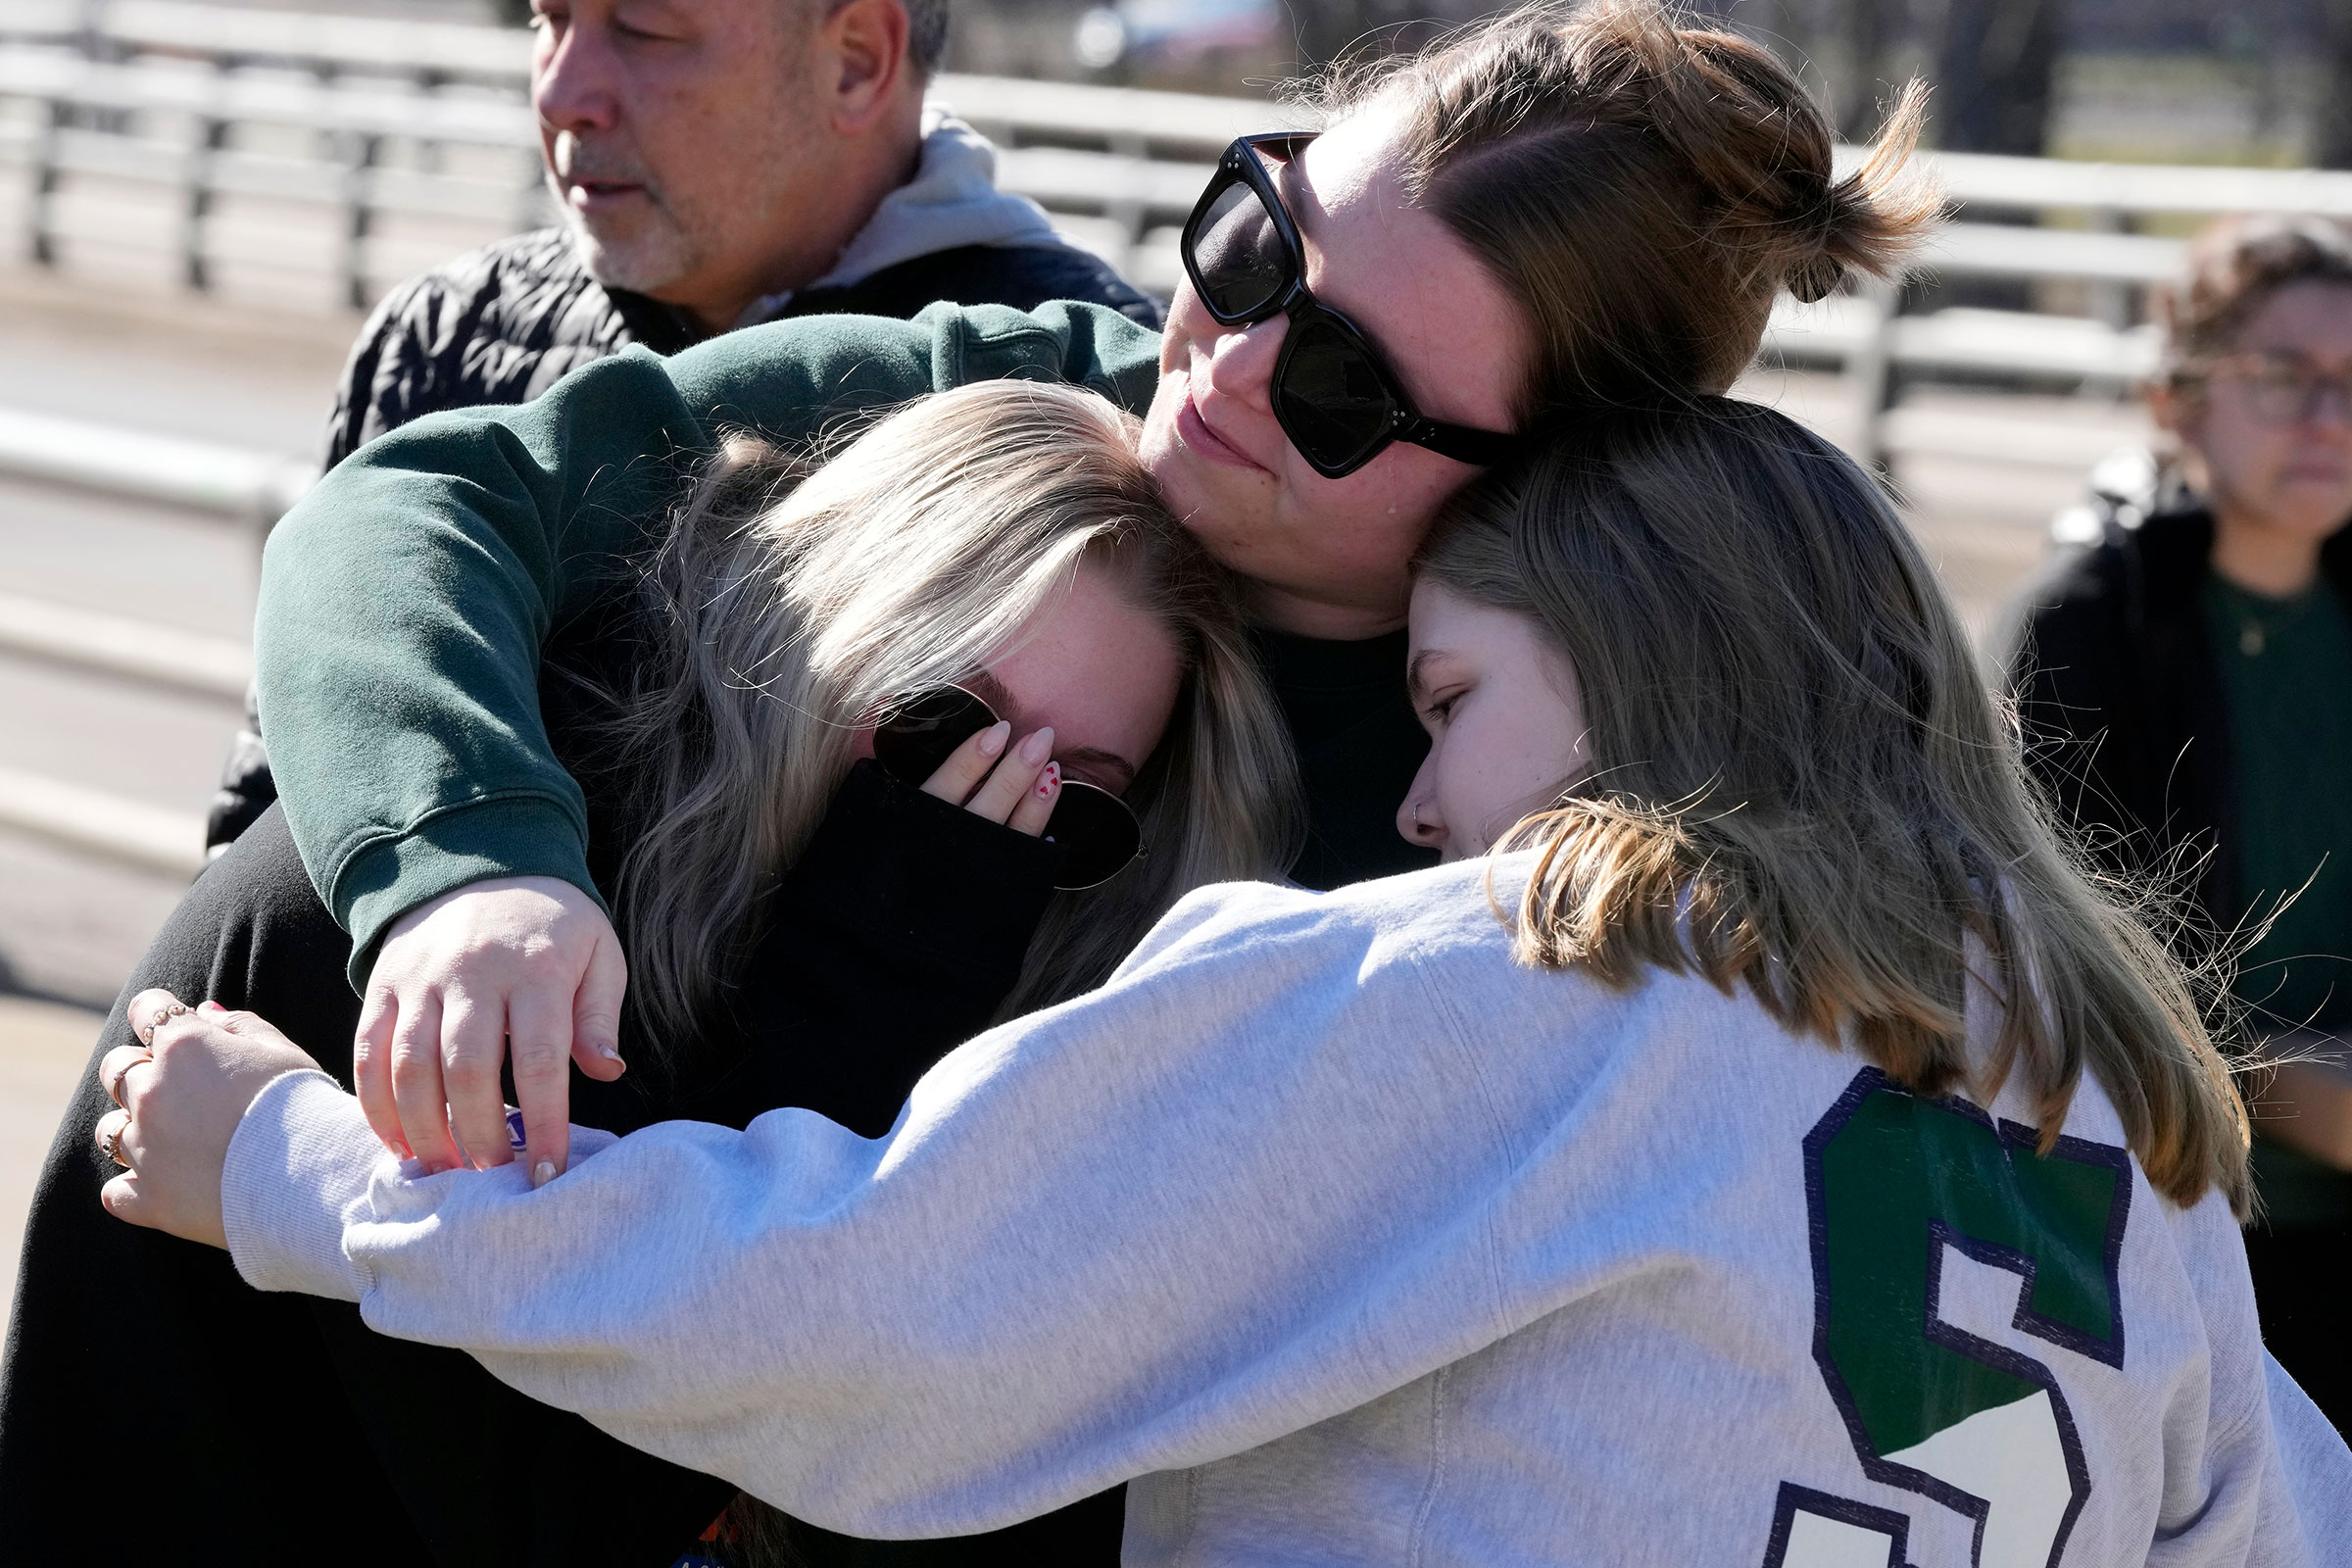 Michigan State University students embrace at The Rock on campus, in East Lansing, Mich. on Feb. 14, 2023. (Carlos Osorio—AP)